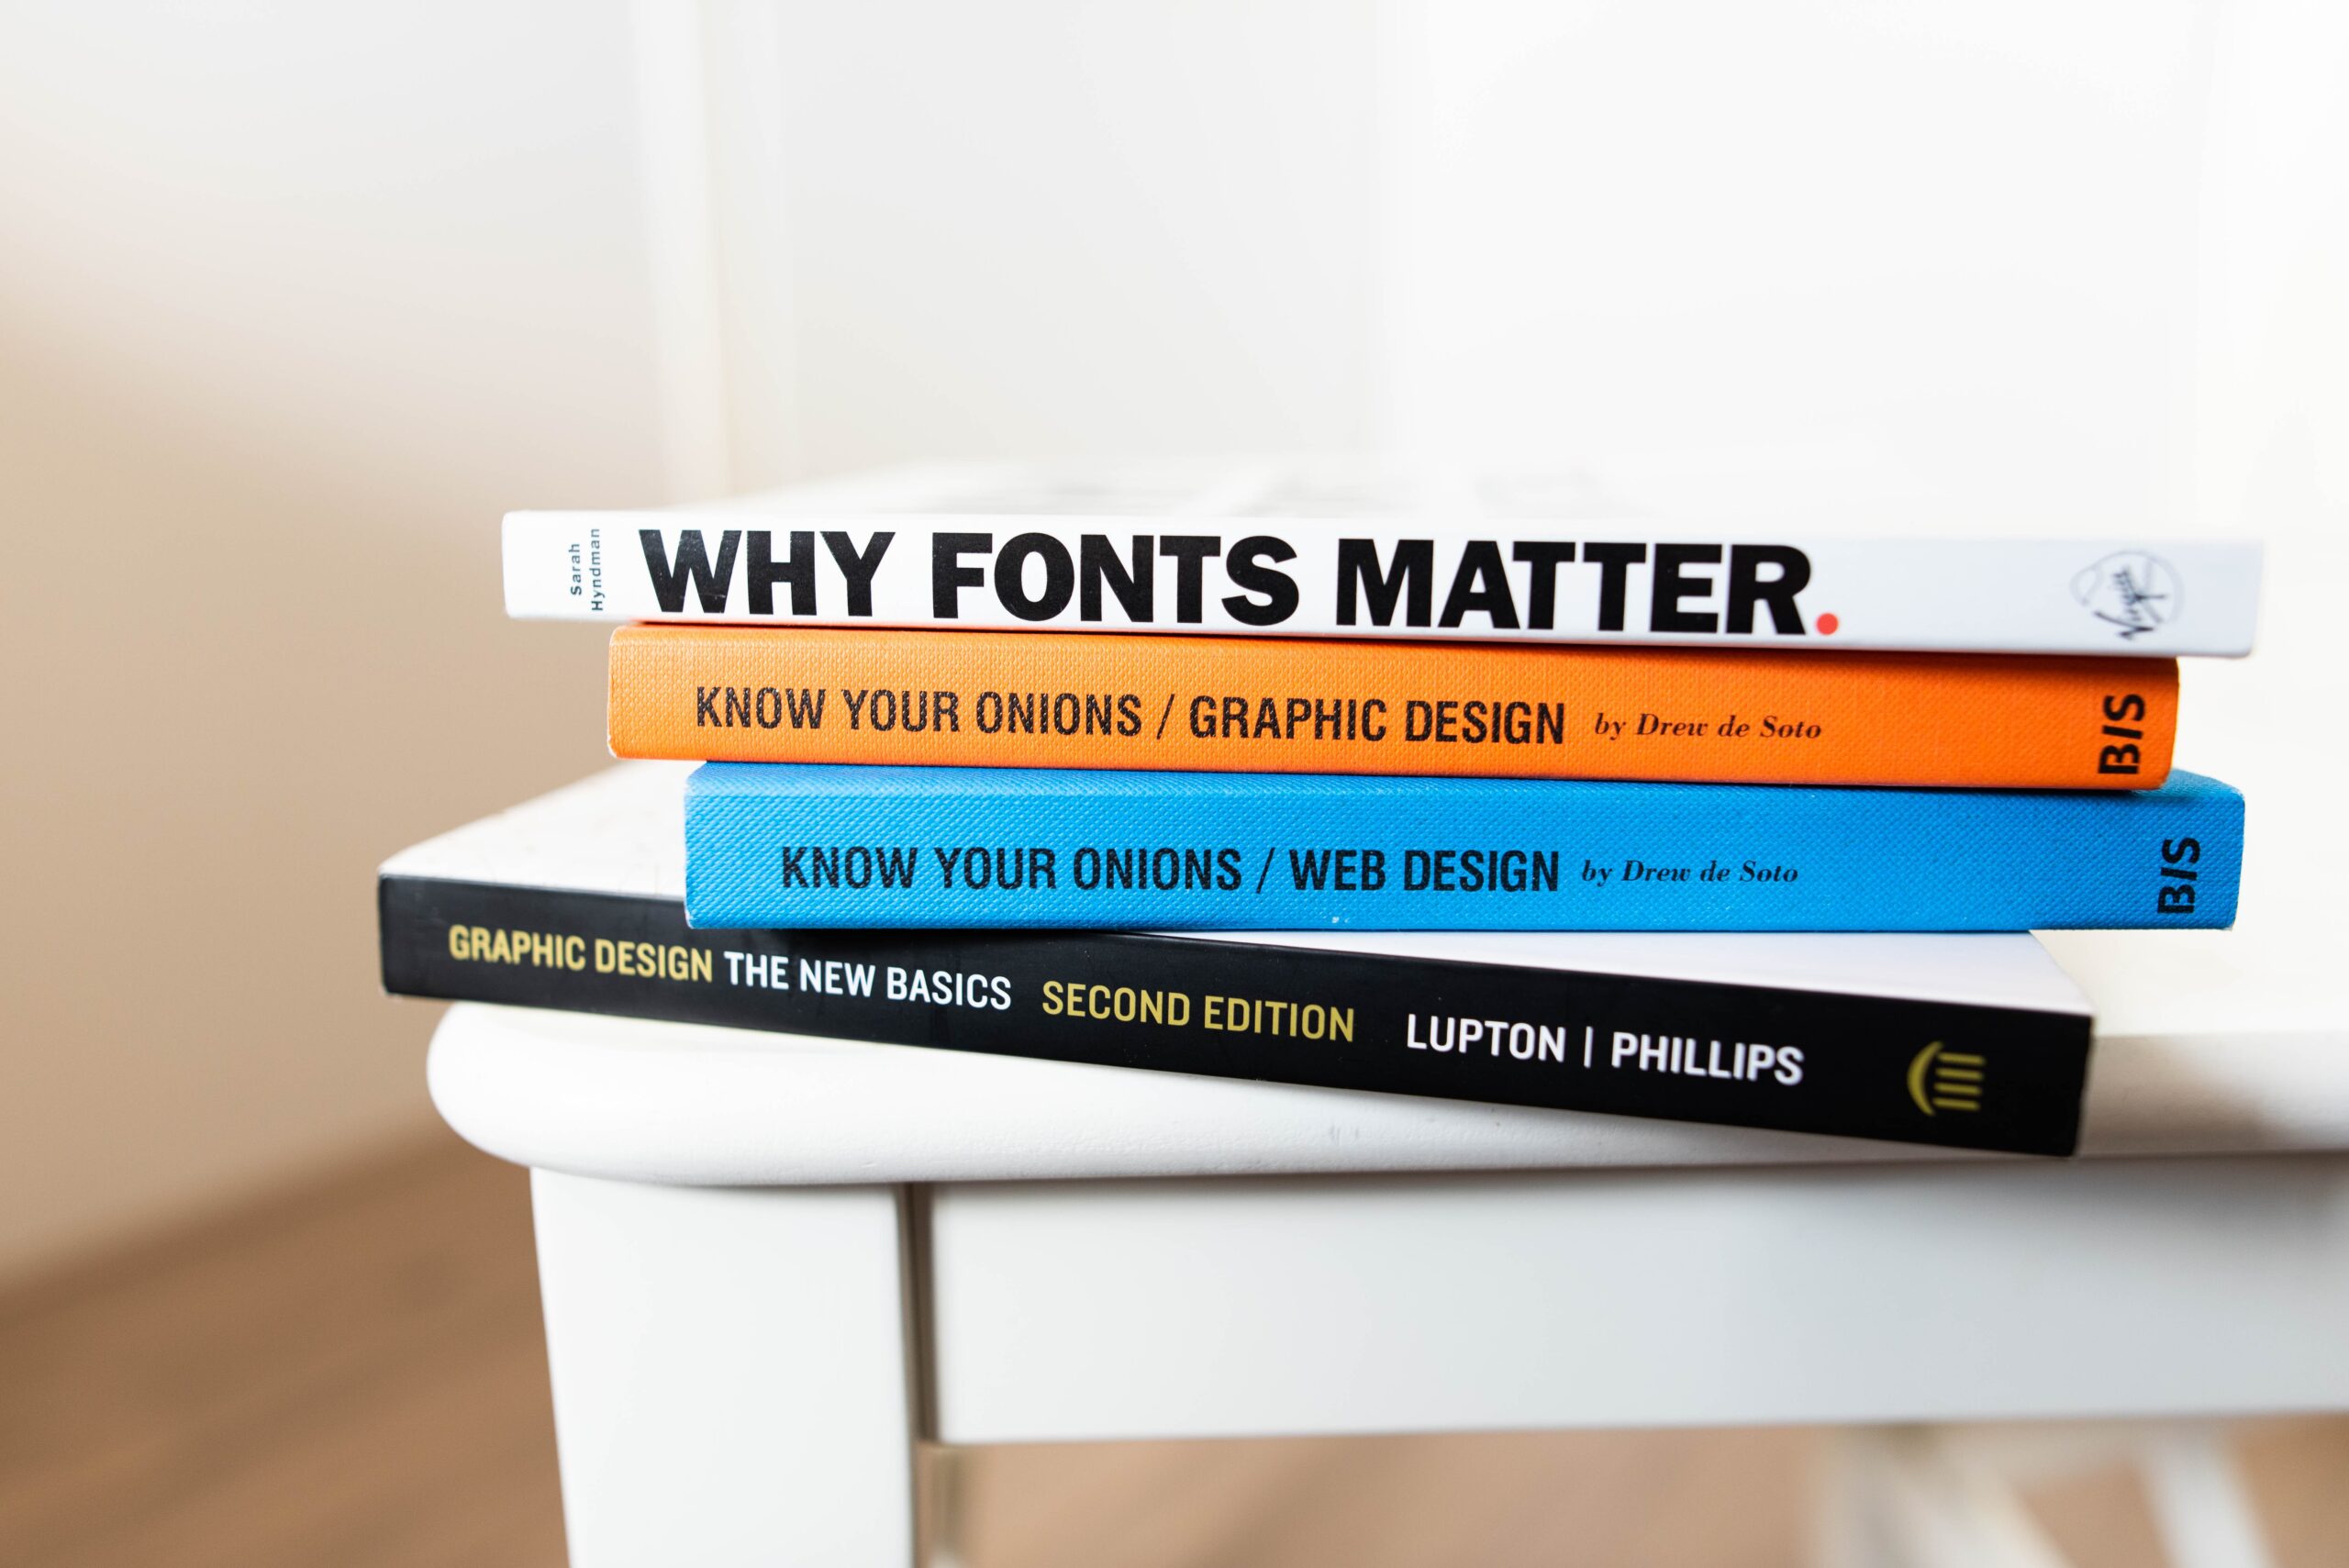 graphic design books on the table